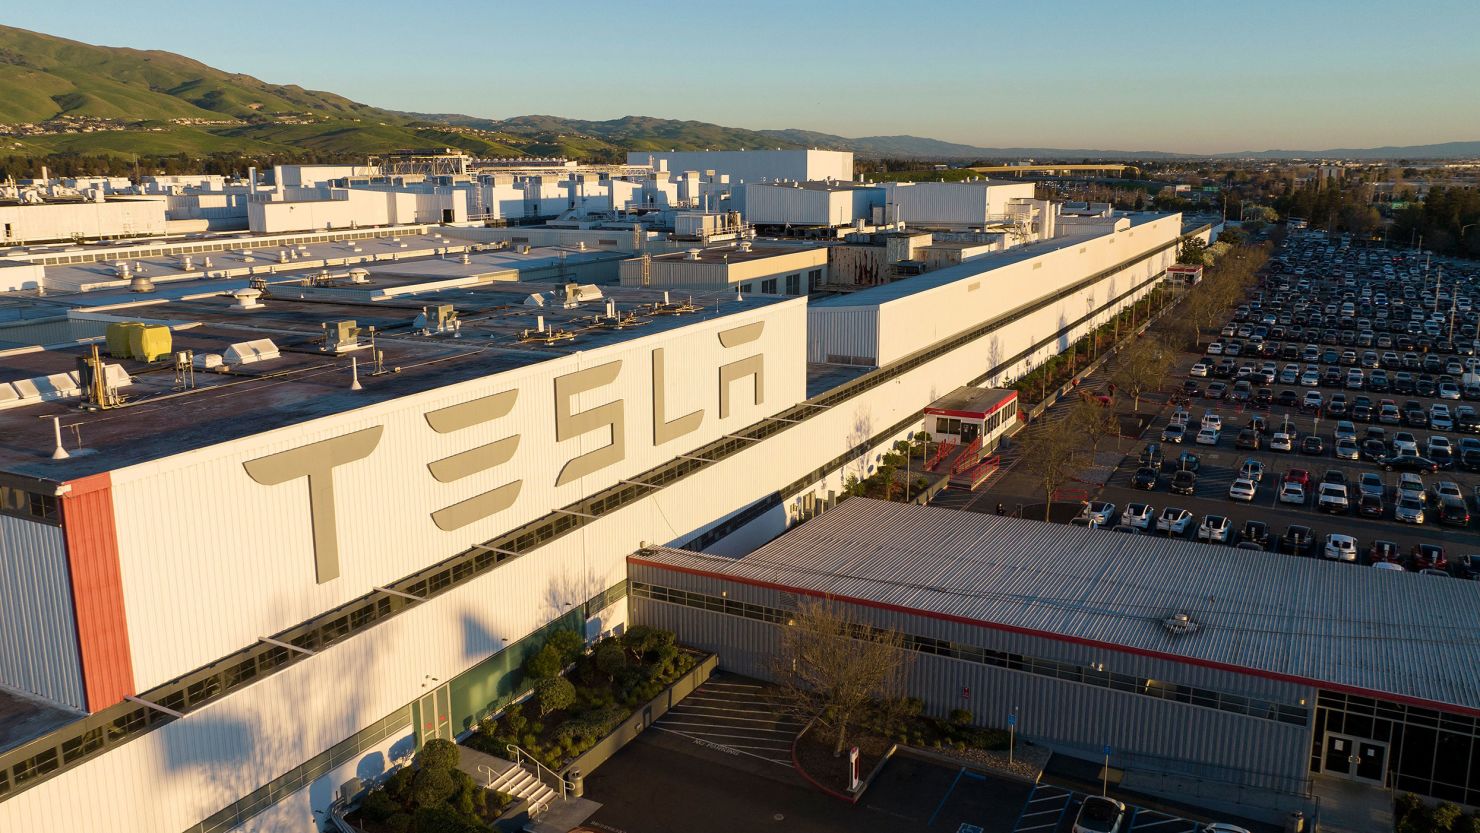 An aerial view shows the Tesla Fremont Factory in Fremont, California on February 10, 2022.